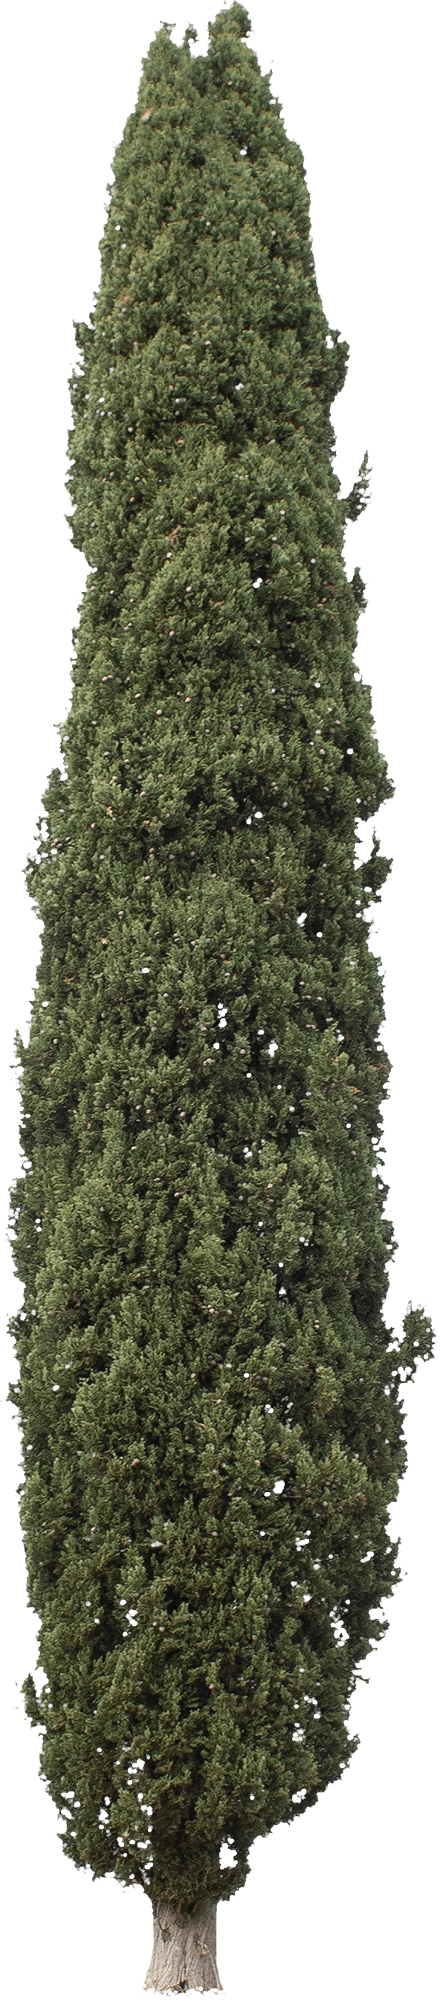 meye cupressus sempervirens cut out tree in png